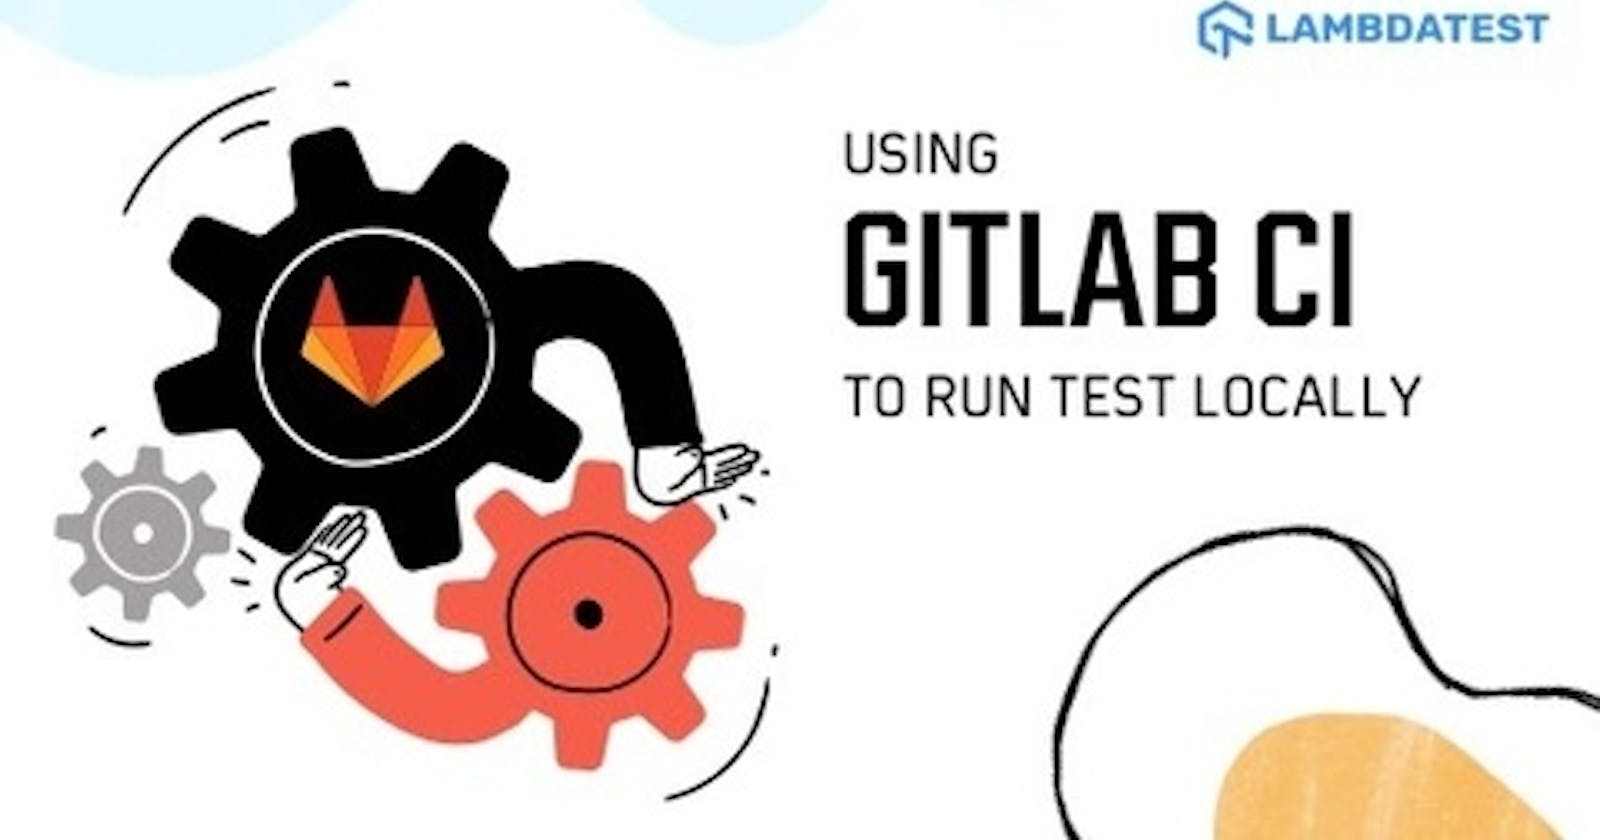 How To Use GitLab CI To Run Tests Locally?